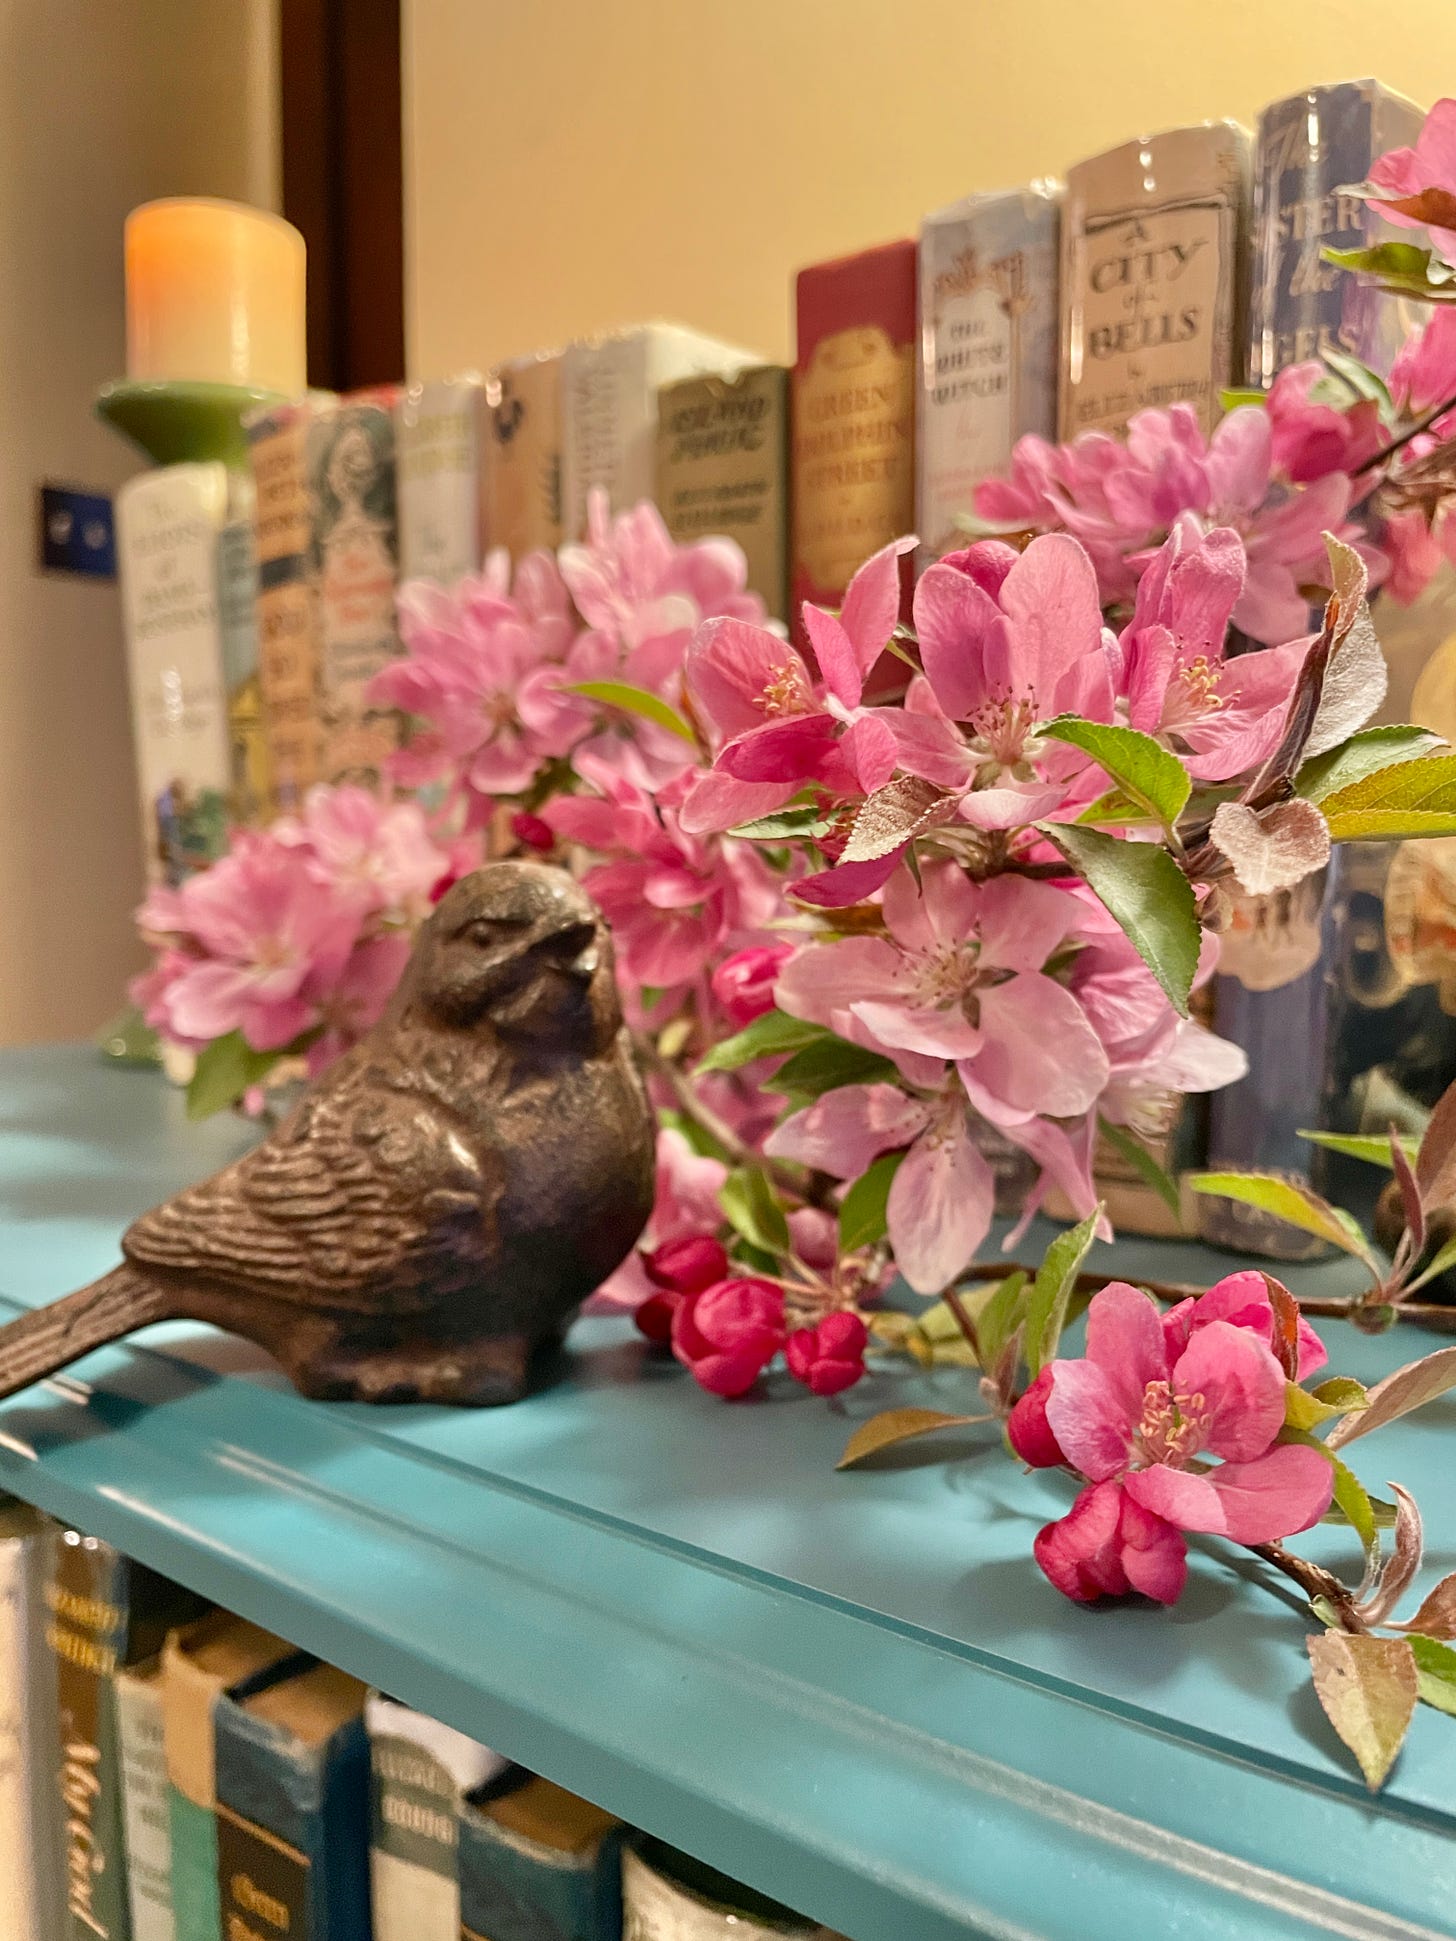 Blossoms, birds and books from my Goudge case for Elizabeth’s birthday today.